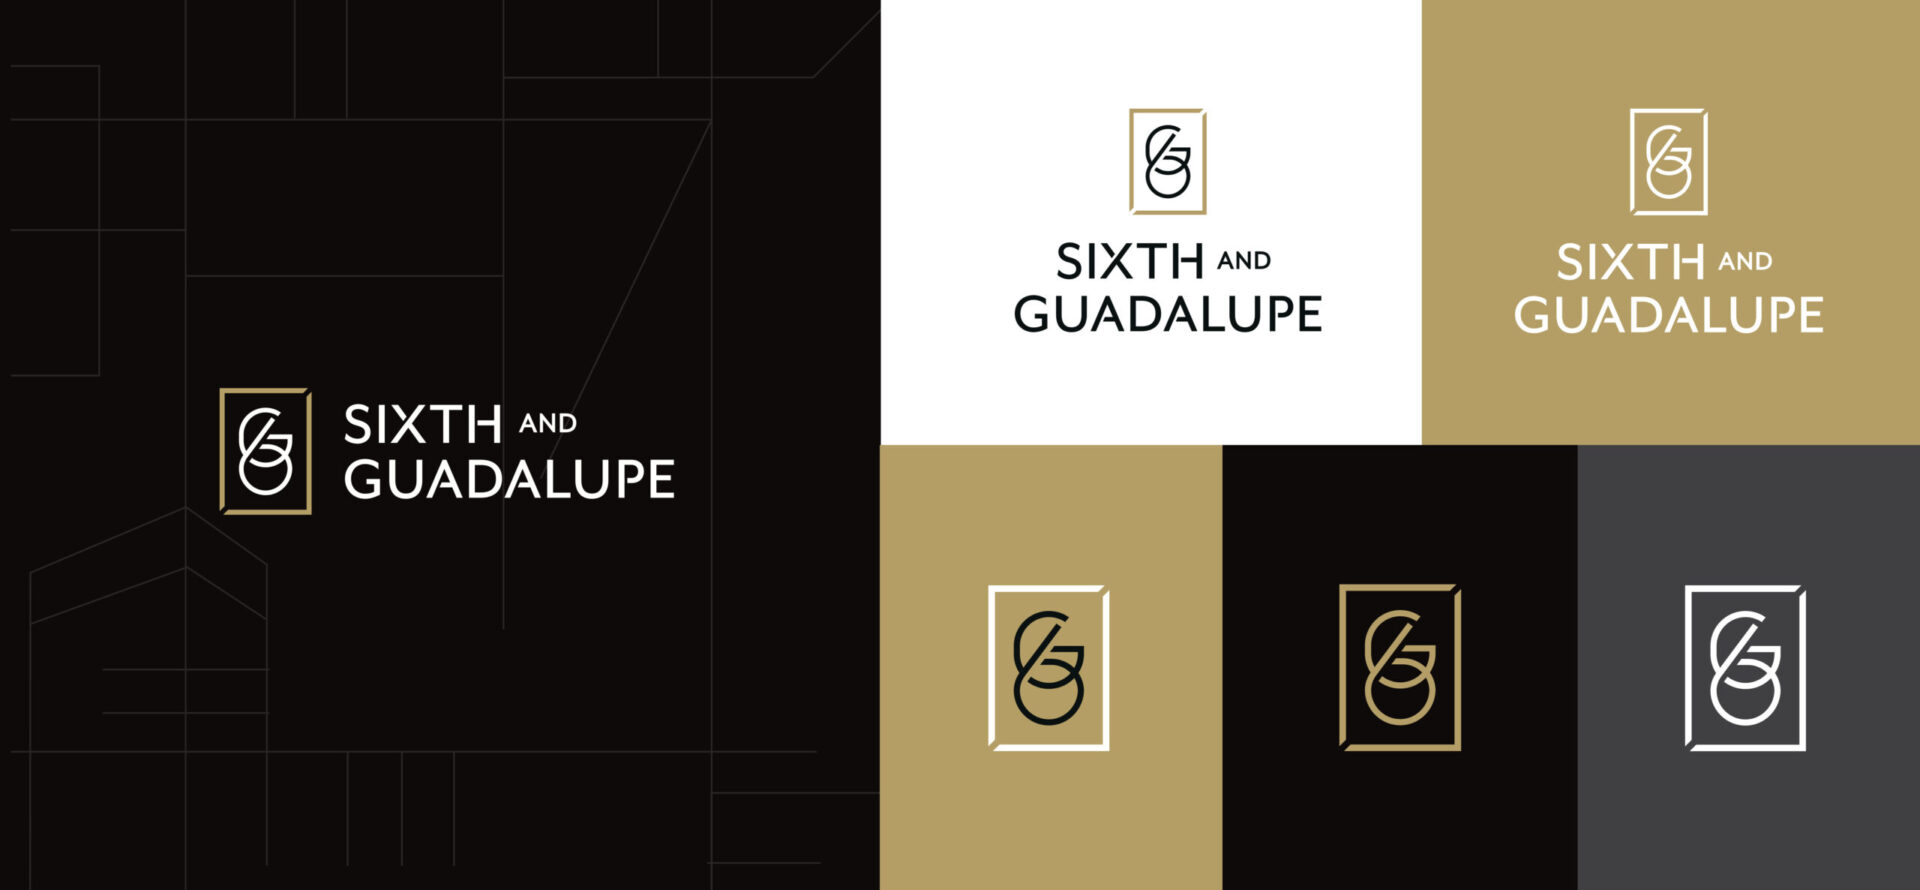 Sixth-and-Guadalupe-Brand-Identity